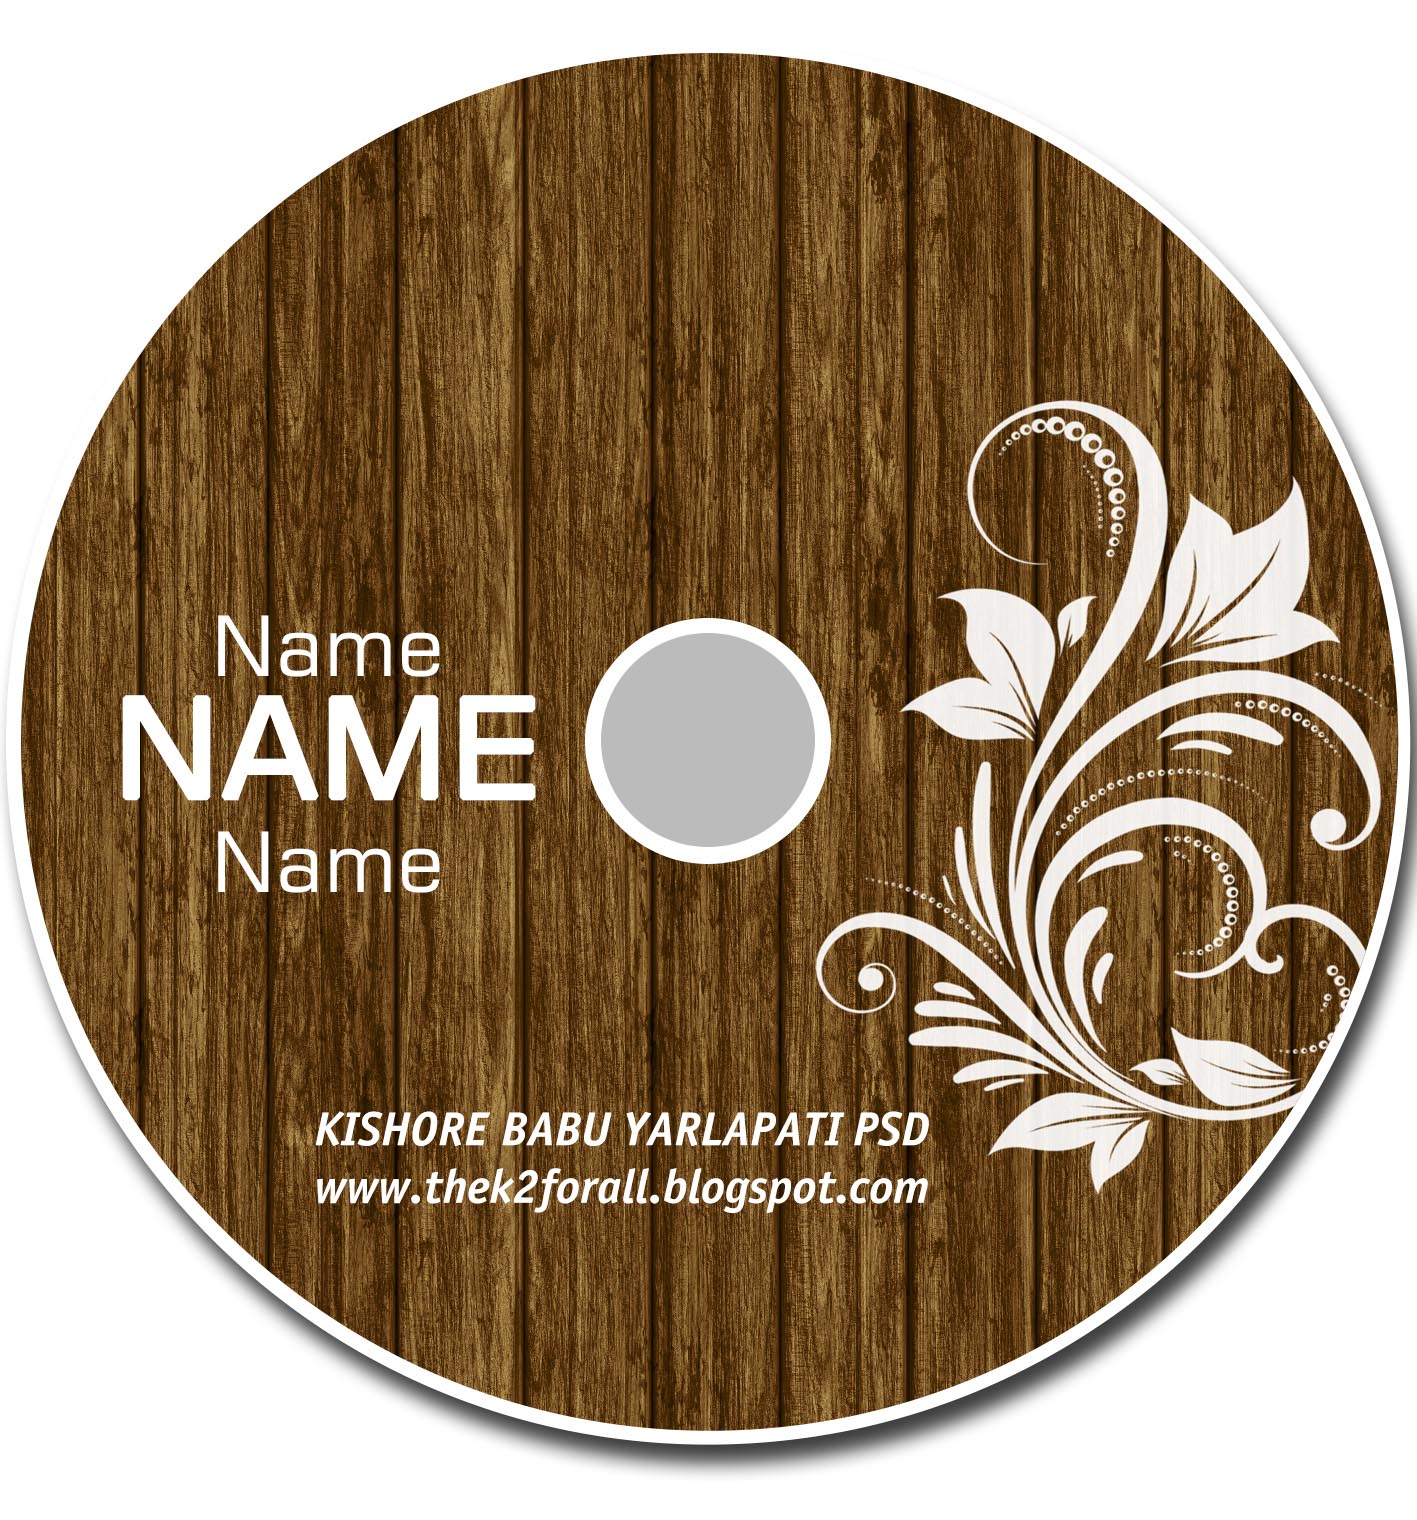 cd cover design template free download